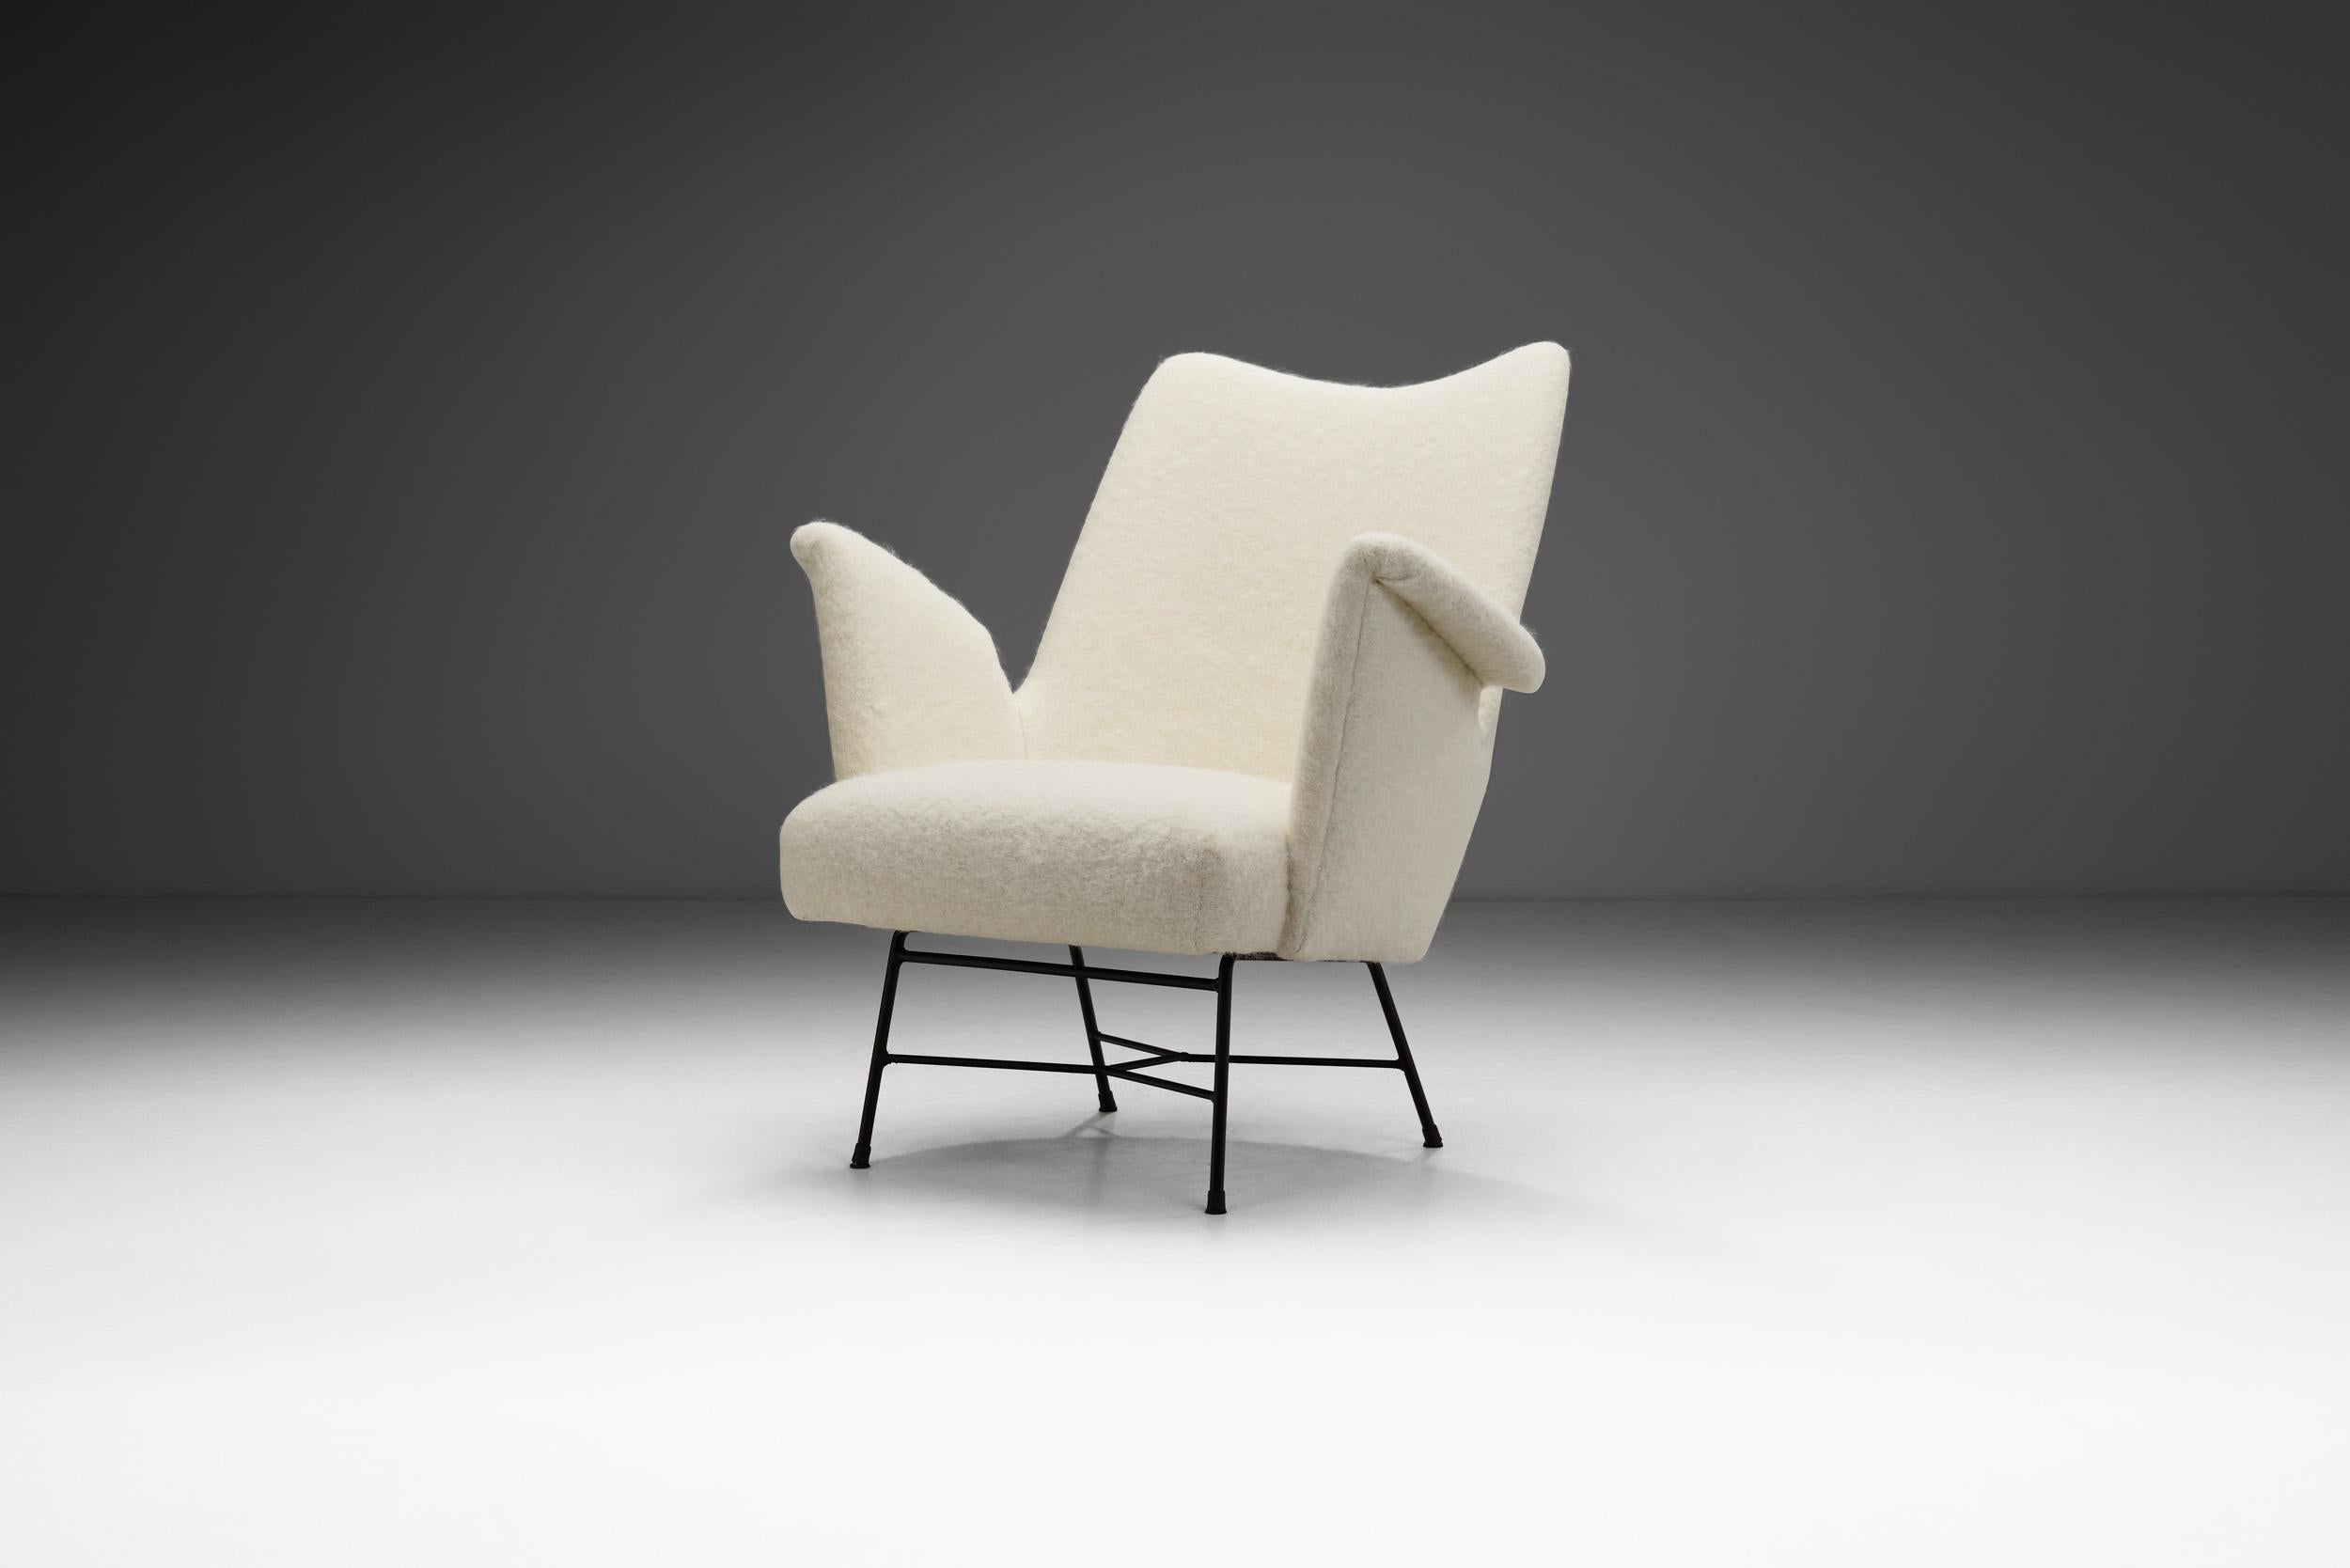 This individualistic chair possesses a look that is eternally relevant regardless of current trends, a charm that would likely be called ‘the Mid-Century Modern style’. 

The arms and back give this model a sculptural and striking appearance. This